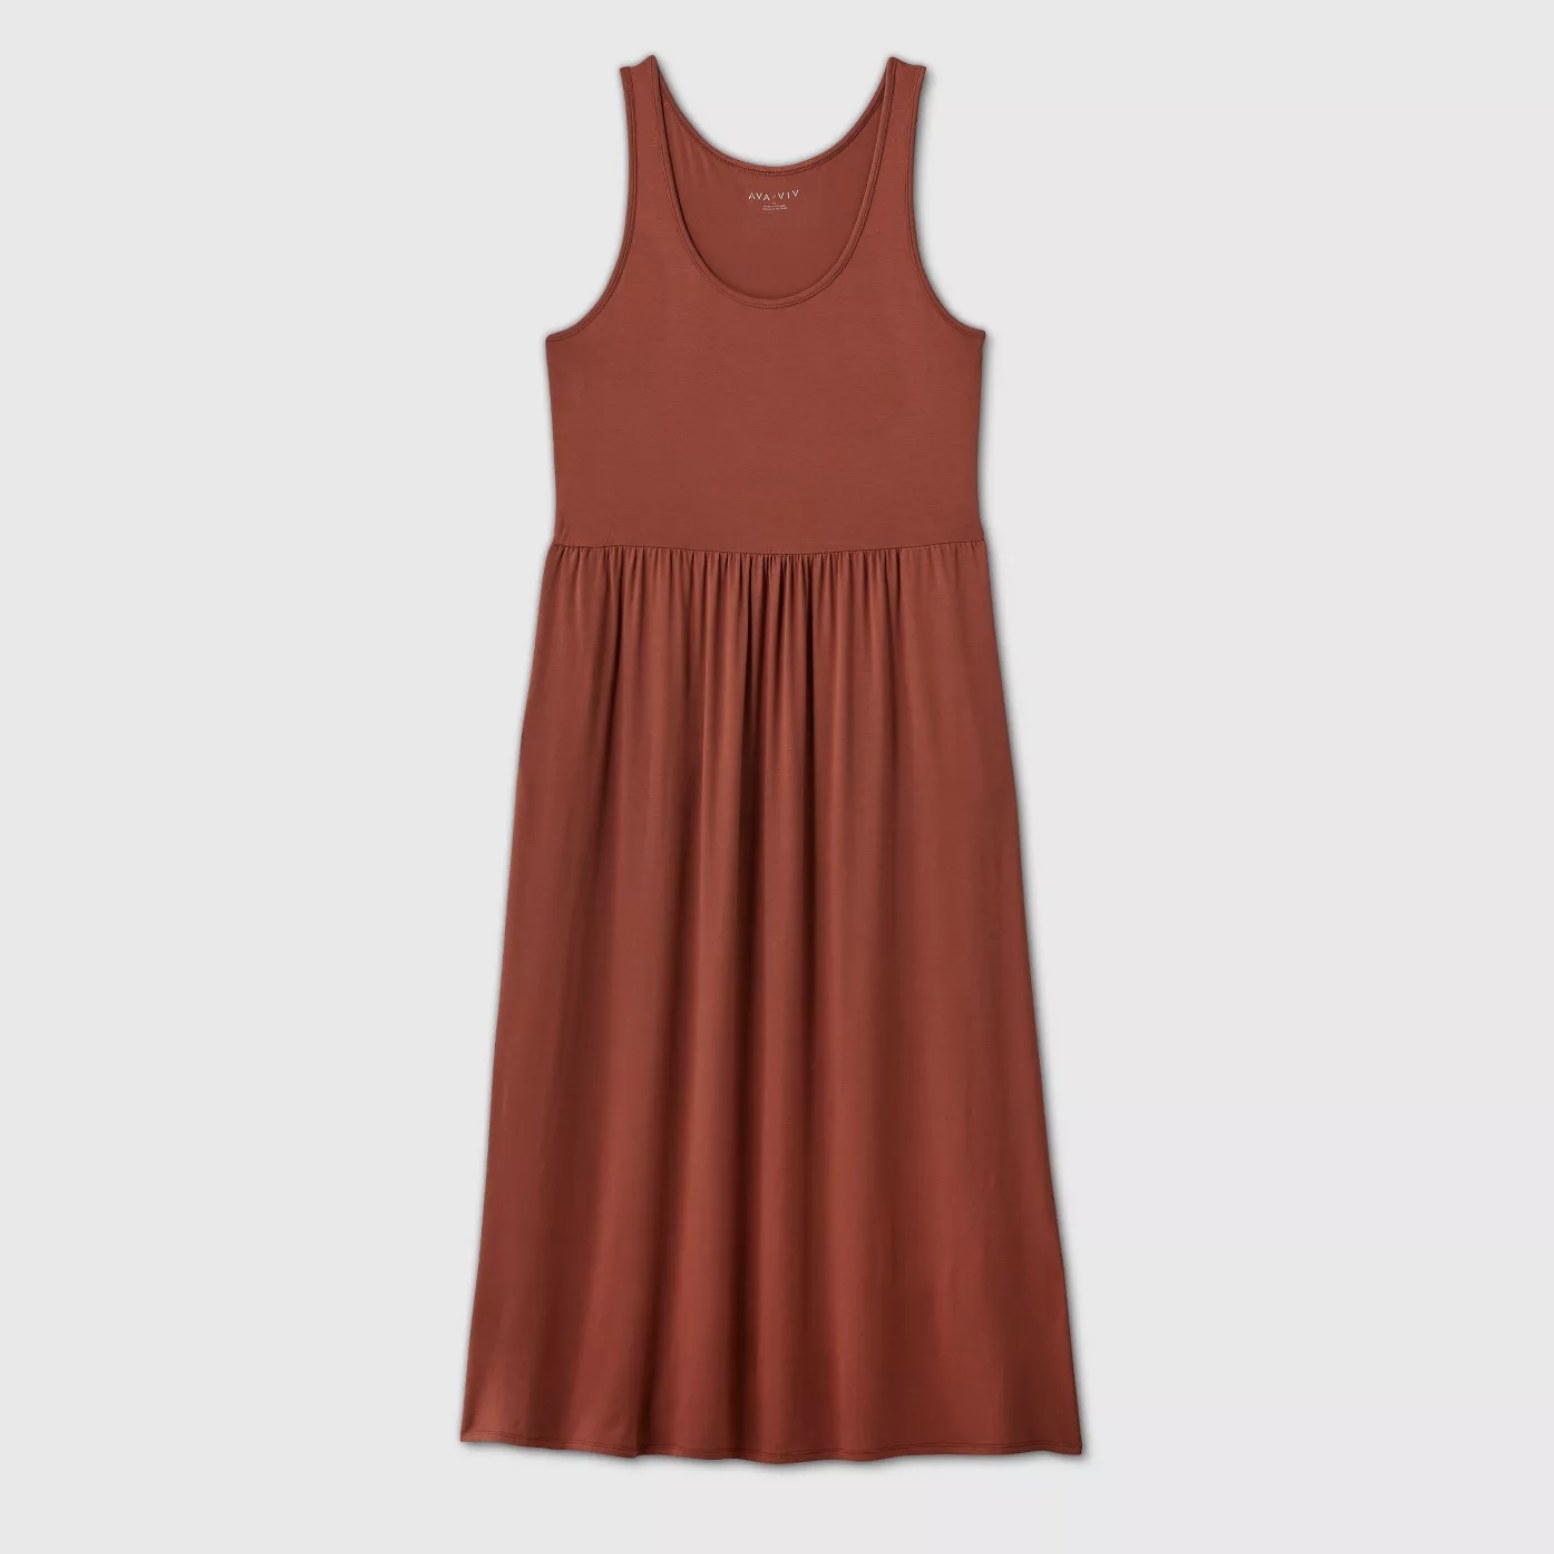 An image of a maroon sleeveless dress with a cinched waistline